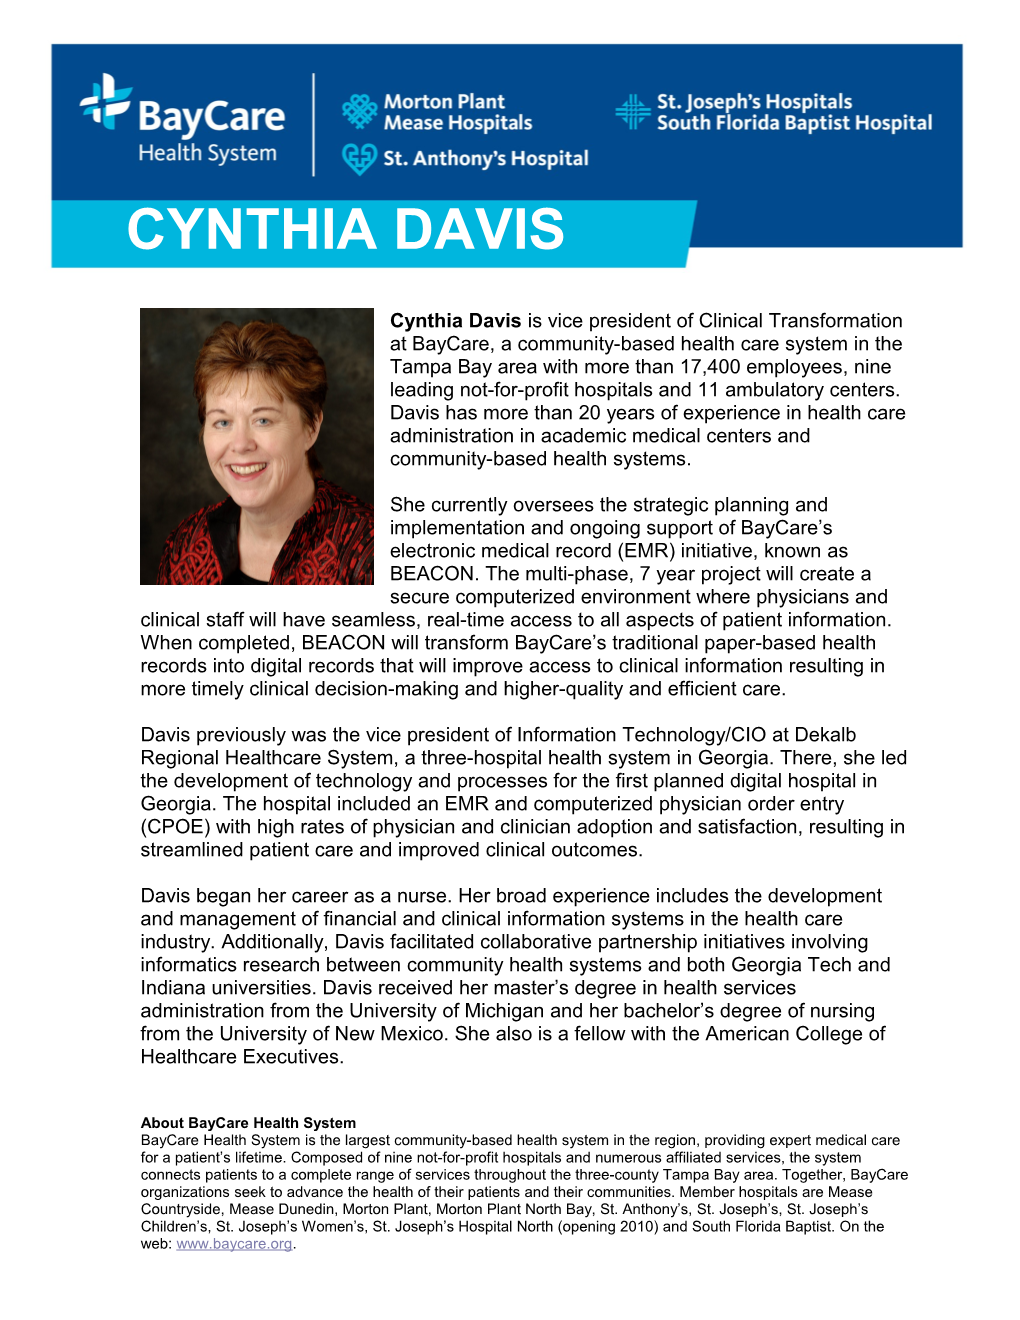 Cynthia Davis Is Vice President of Clinical Transformation at Baycare, a Community-Based